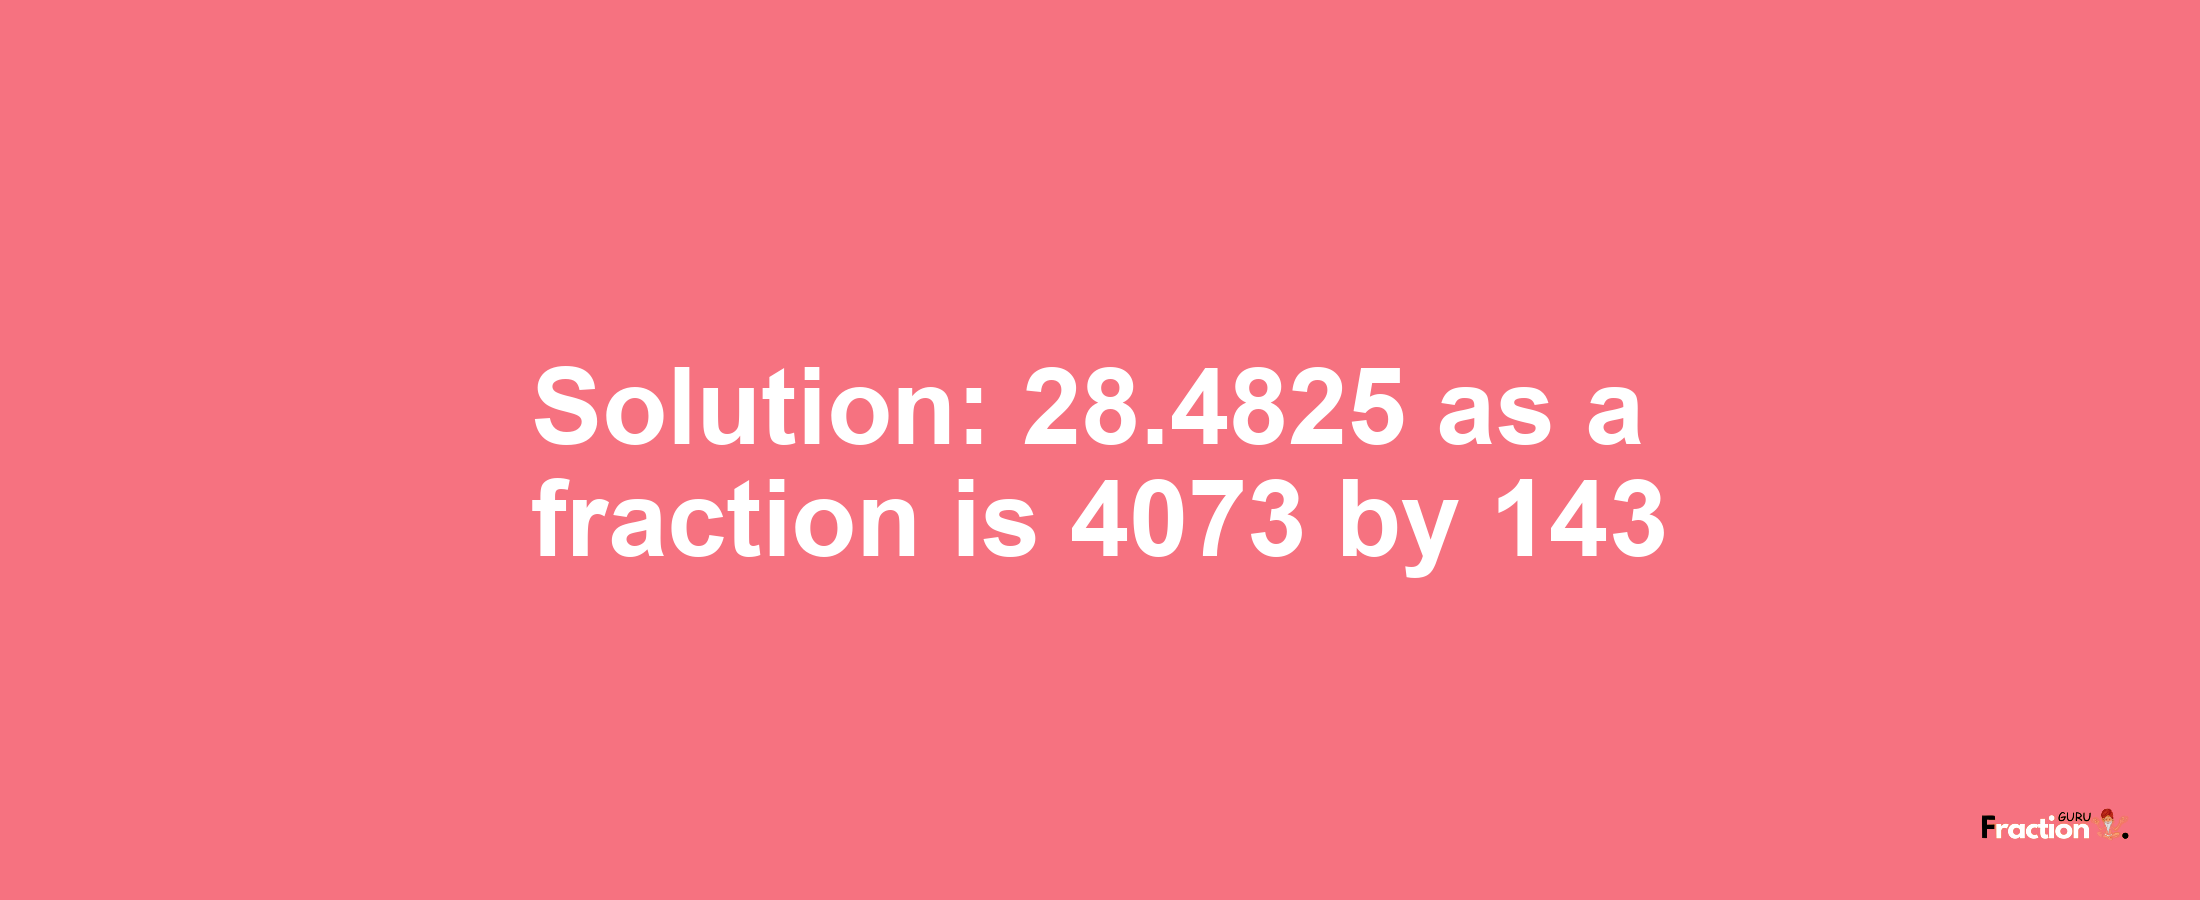 Solution:28.4825 as a fraction is 4073/143